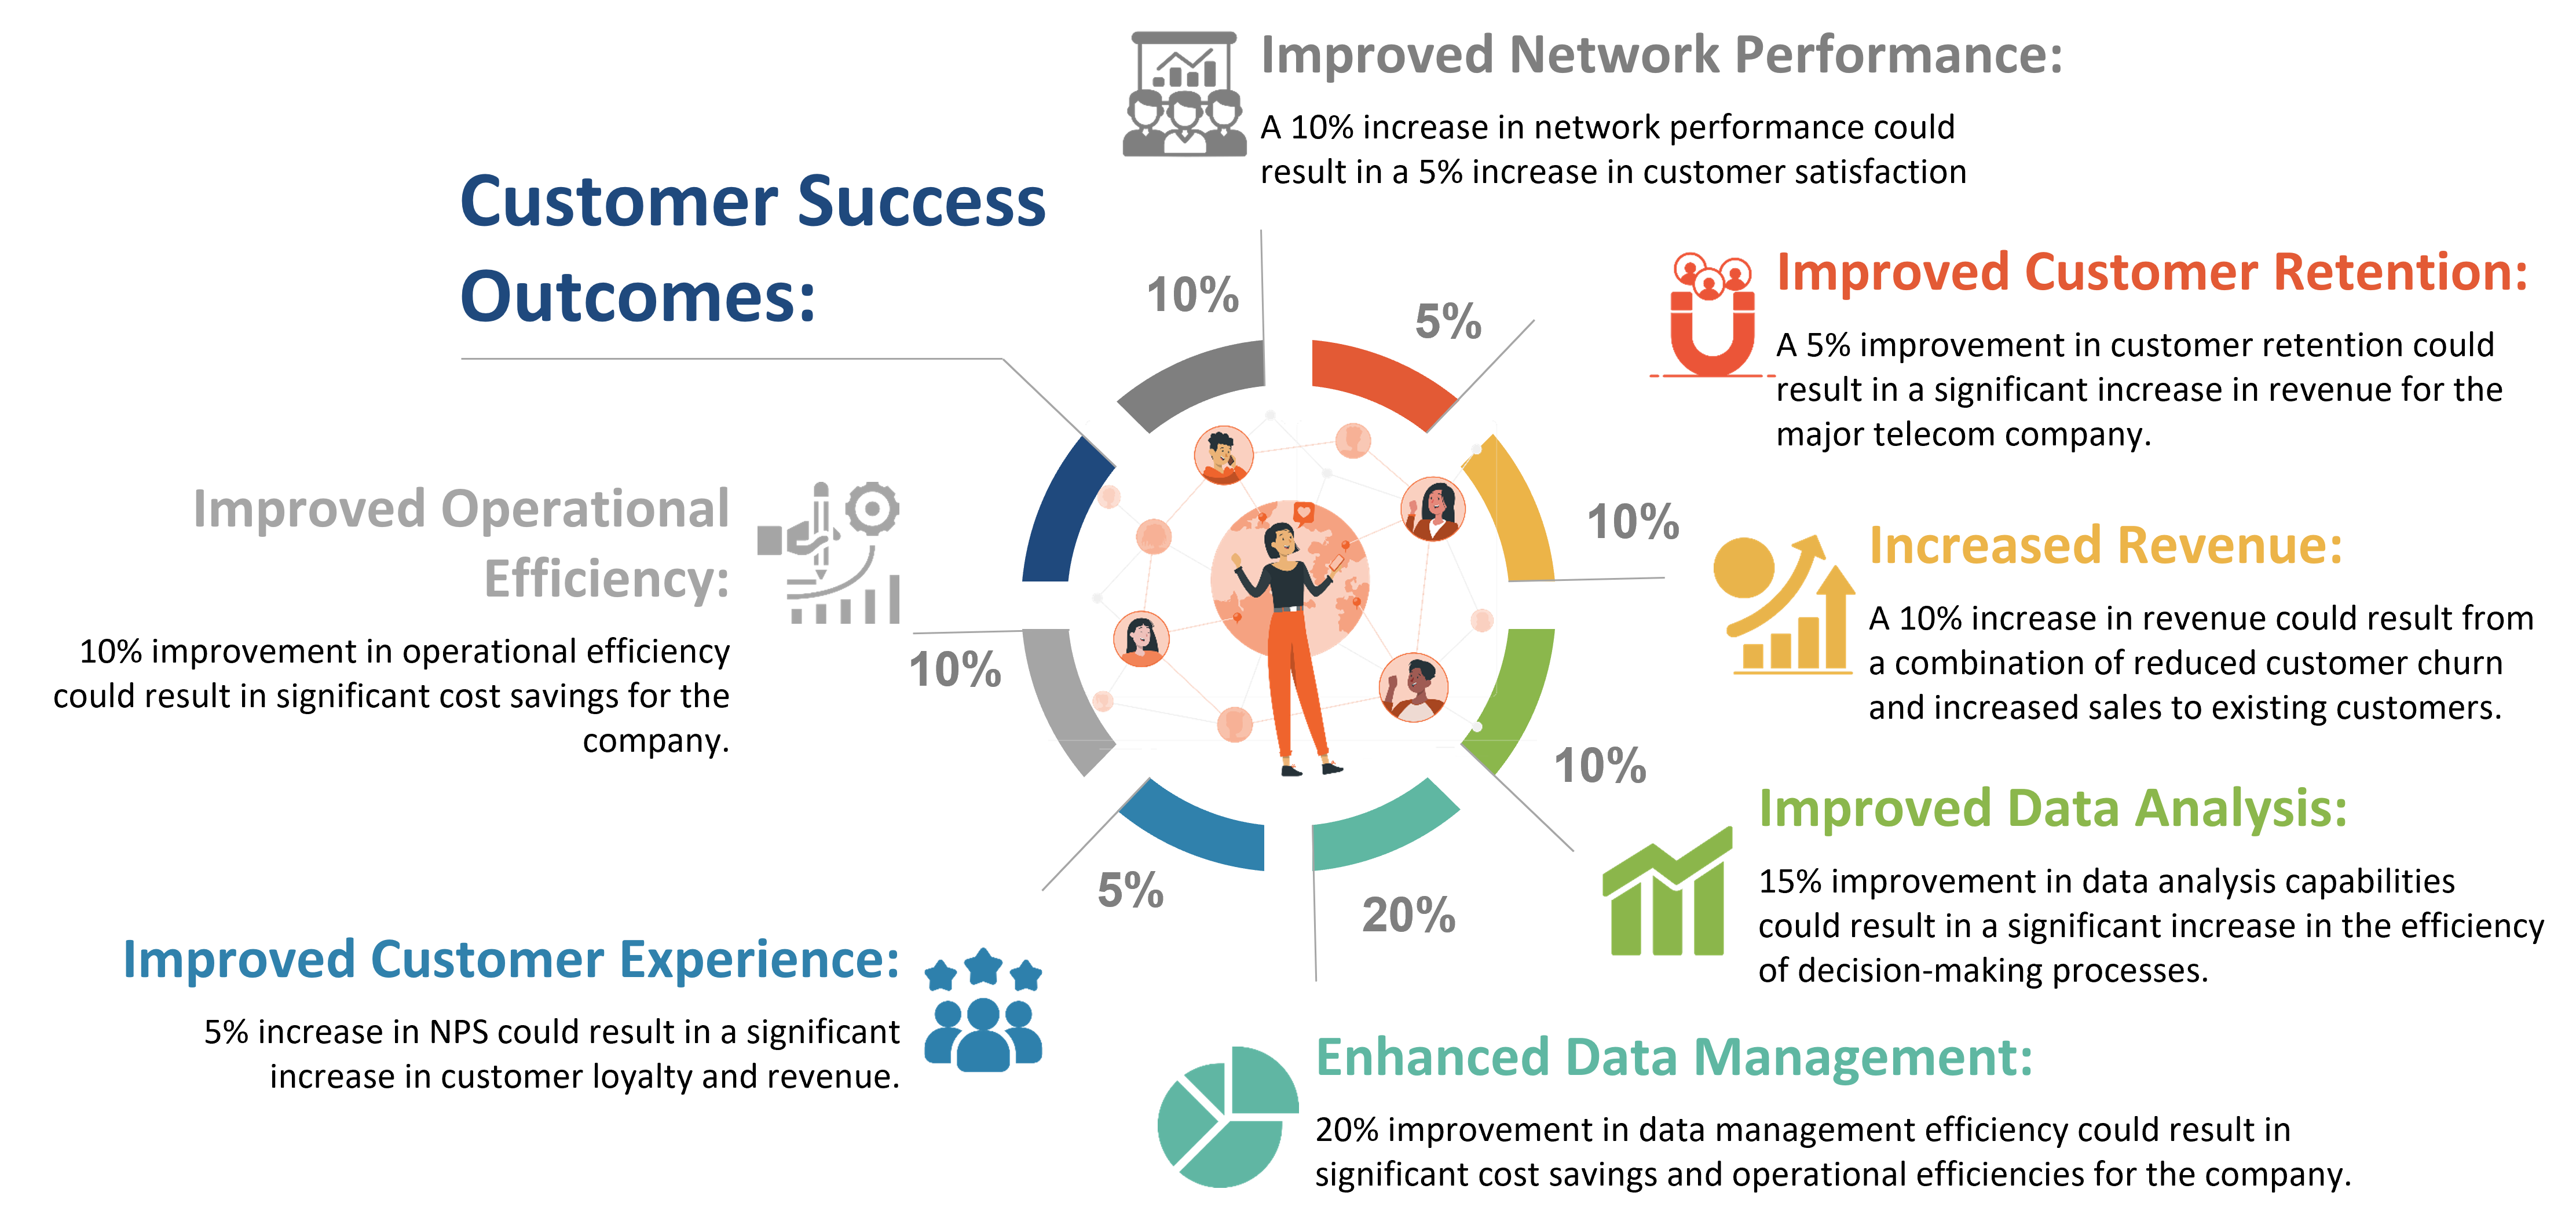 Network Automation Reporting for Major Telecom Company